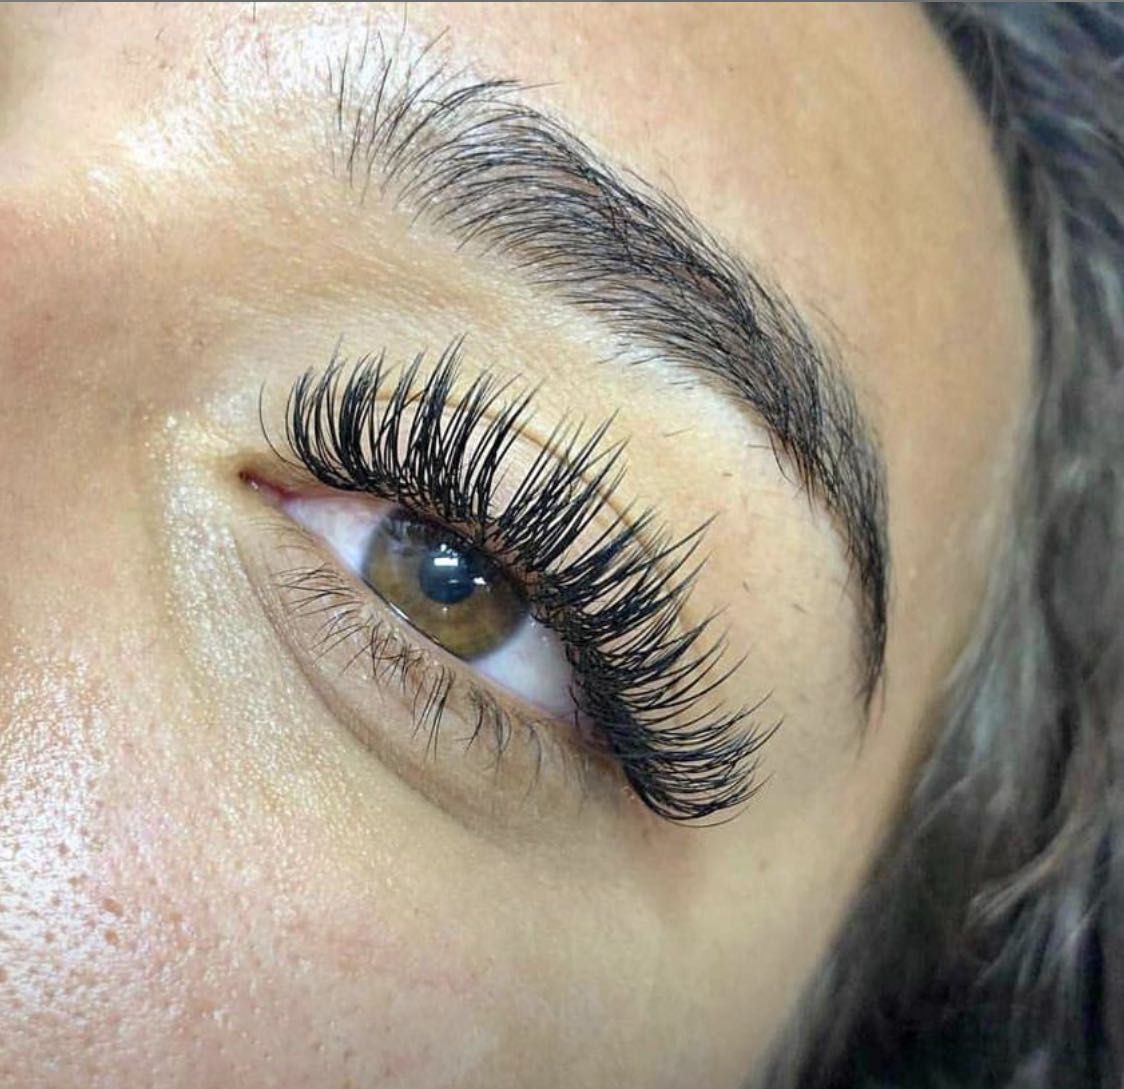 Lash Dolls Beauty Bar - Palm Springs - Book Online - Prices